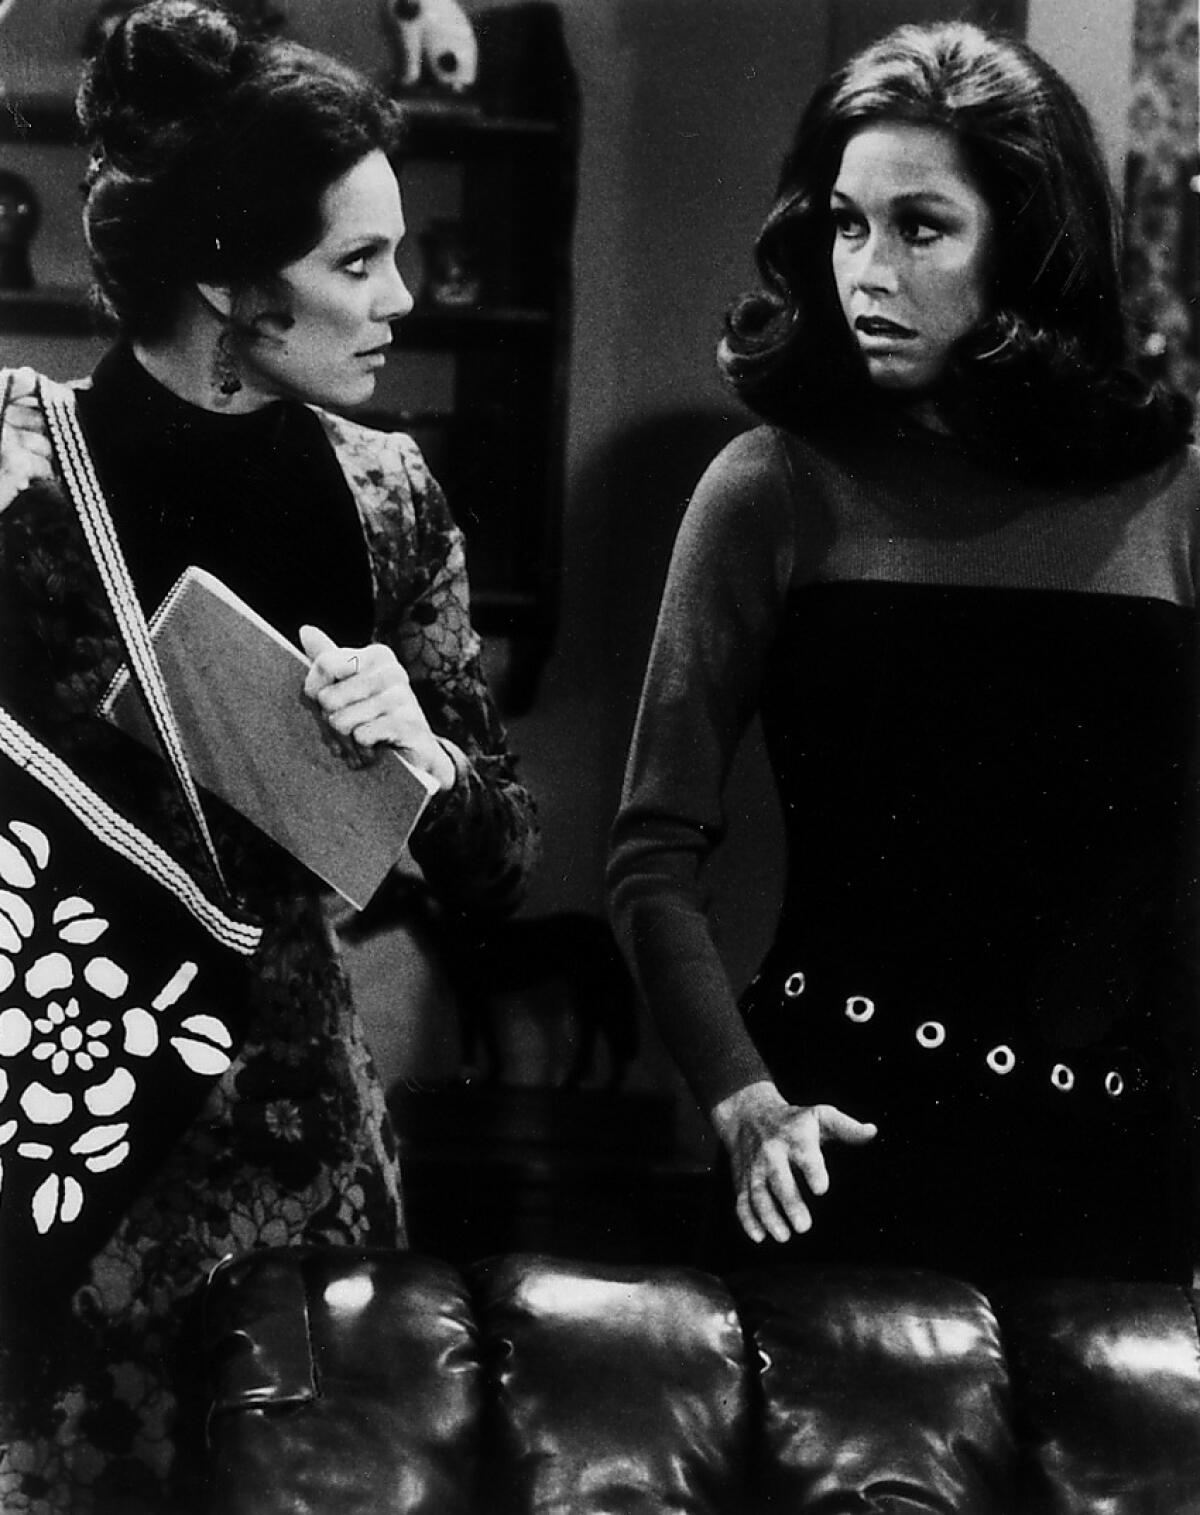 Two women face each other with surprised looks in "The Mary Tyler Moore Show."